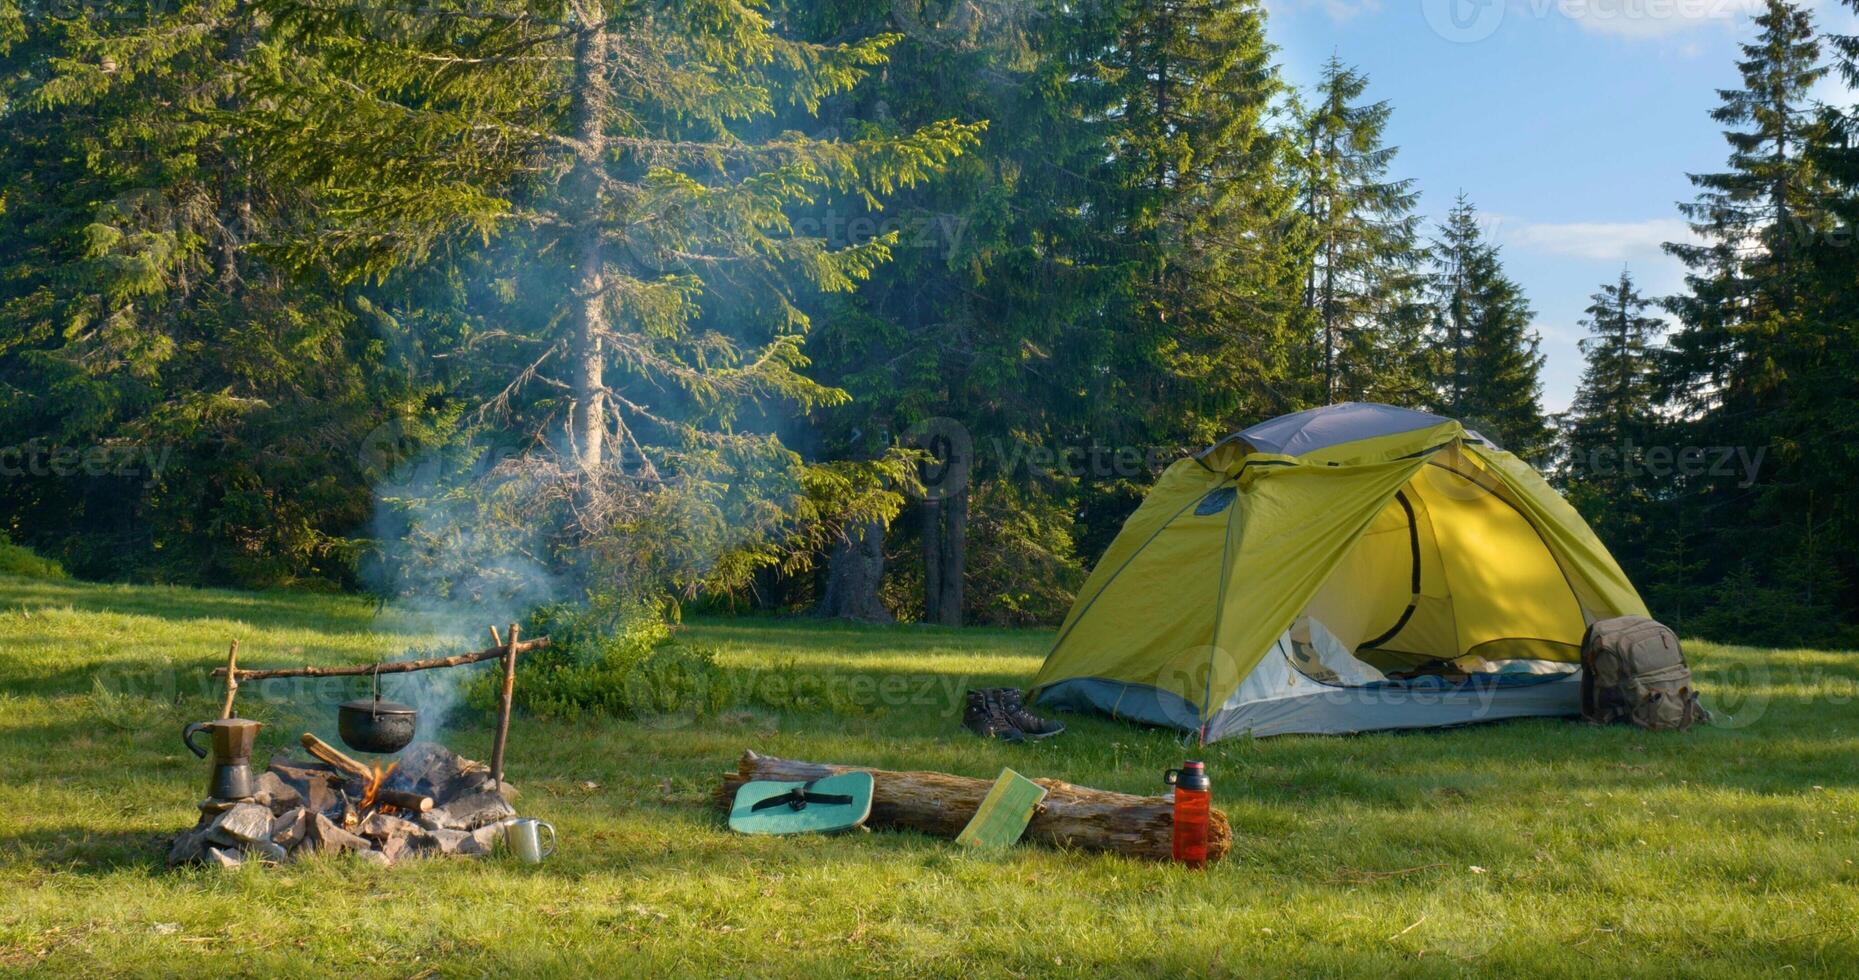 Tent and bonfire on the forest lawn in the mountains. Travel concept photo